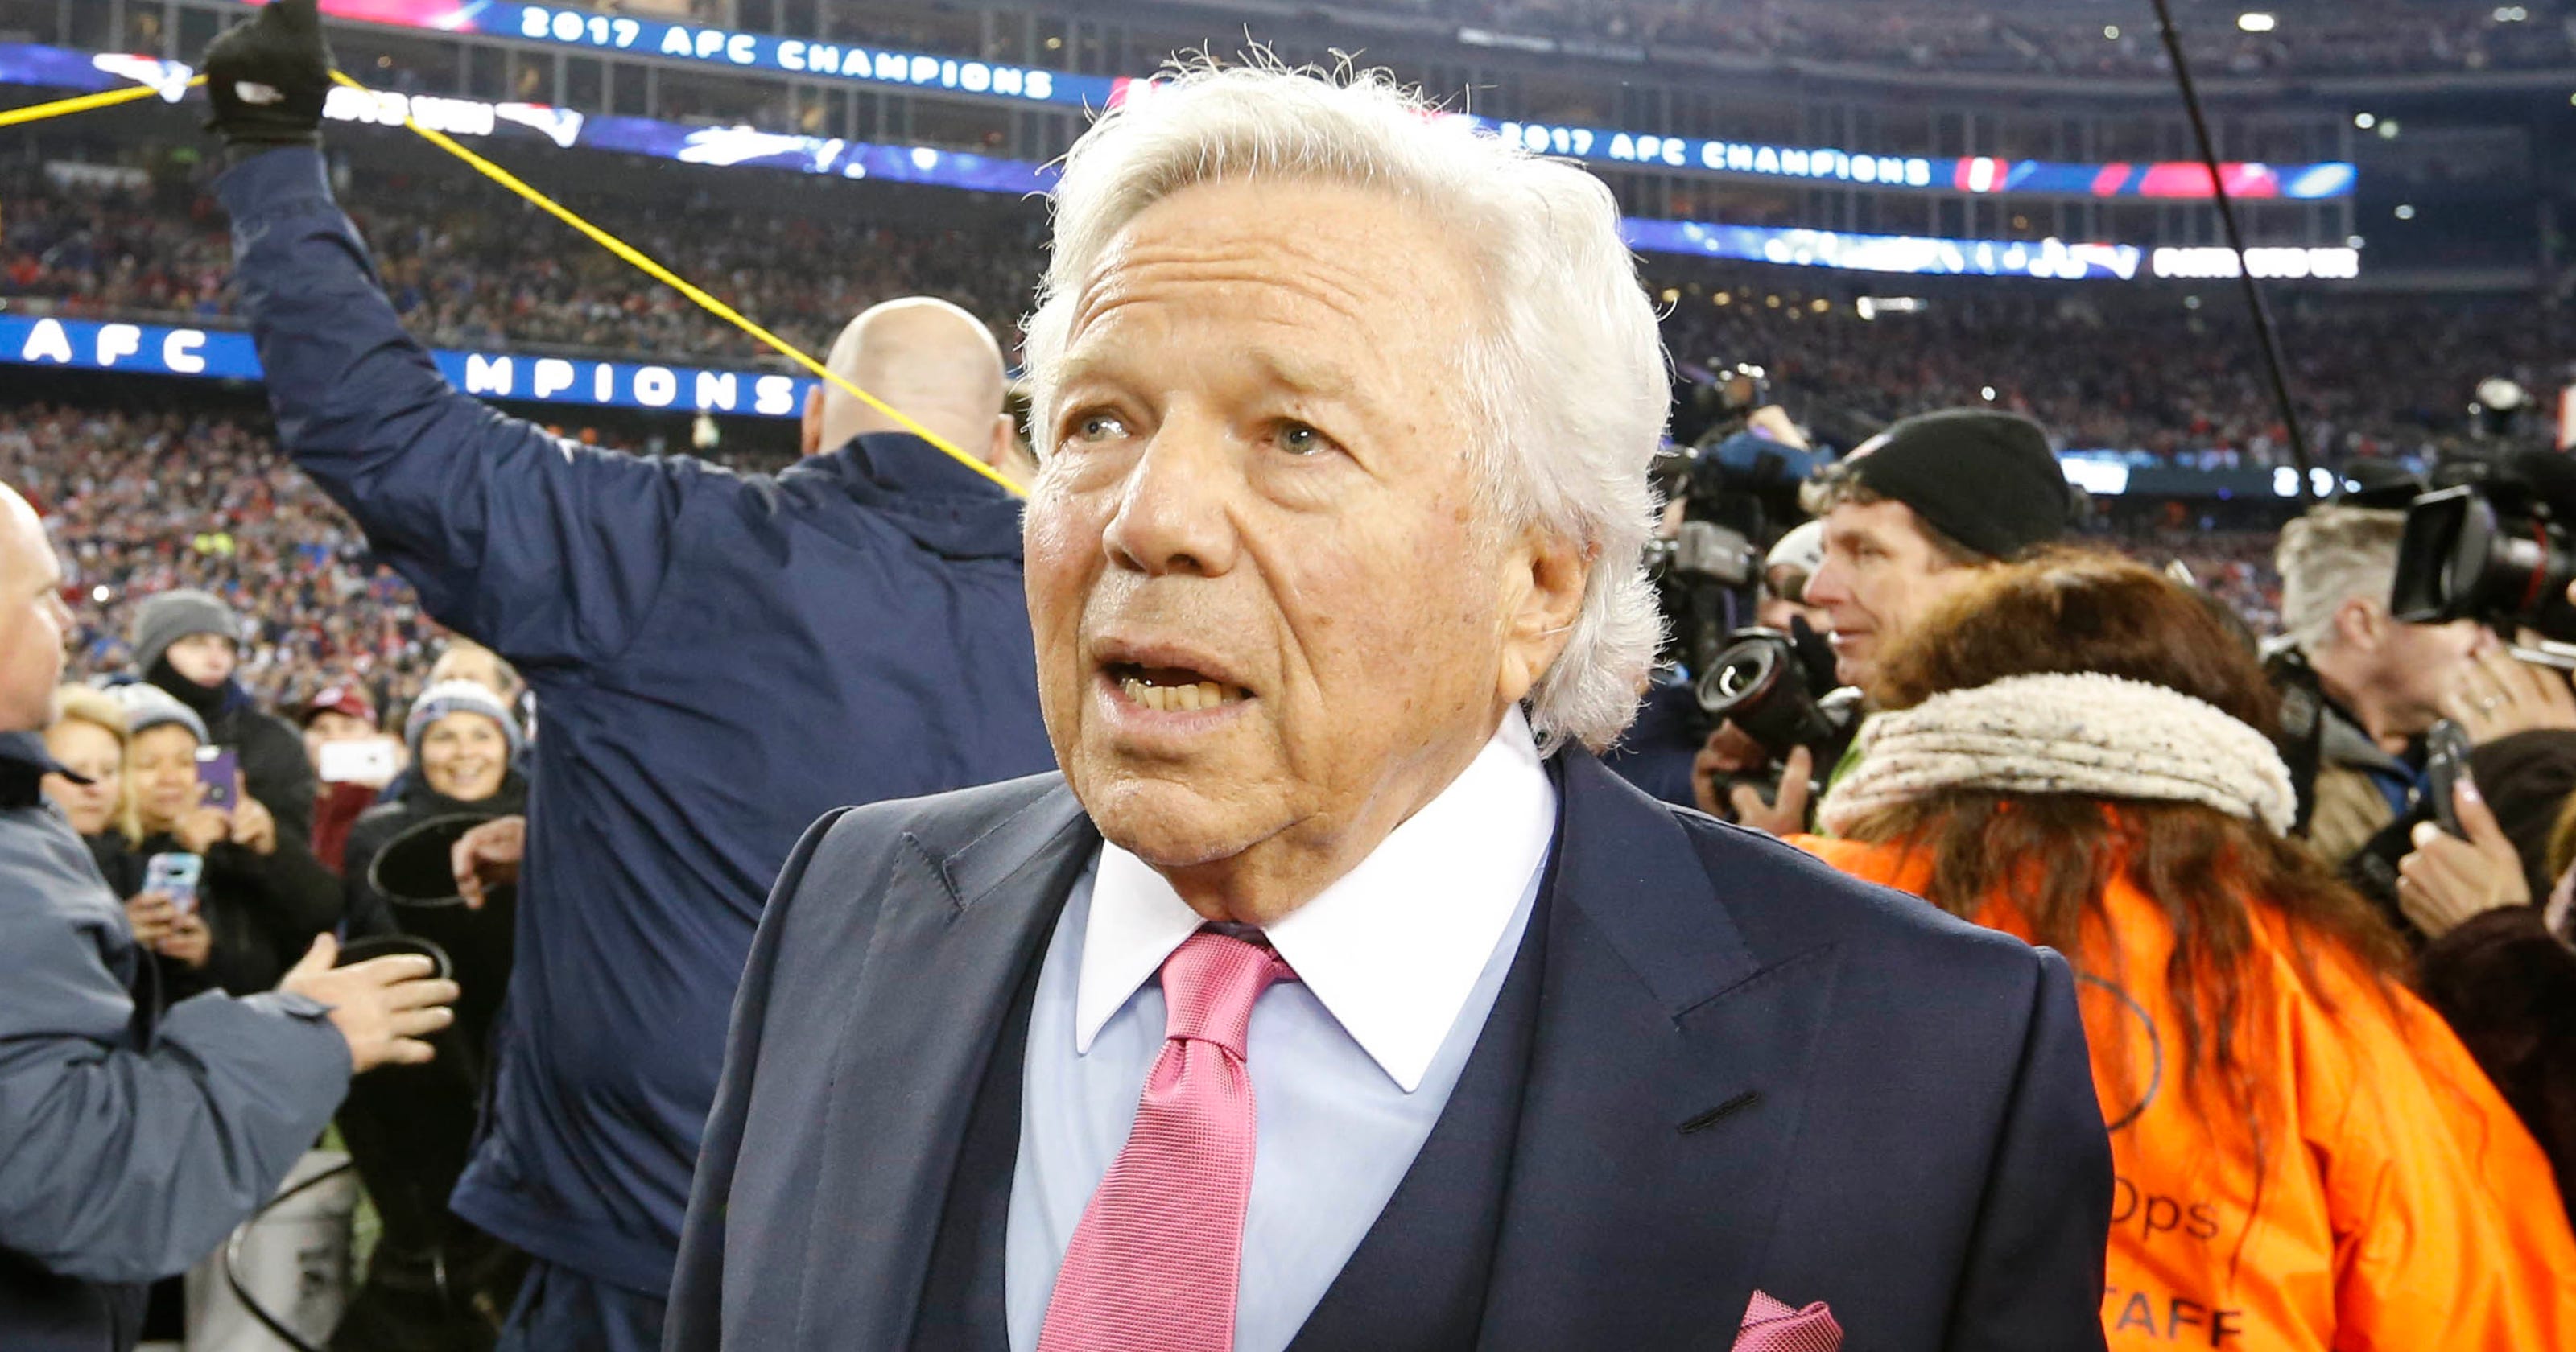 Patriots Owner Robert Kraft Pleads Not Guilty To Charges